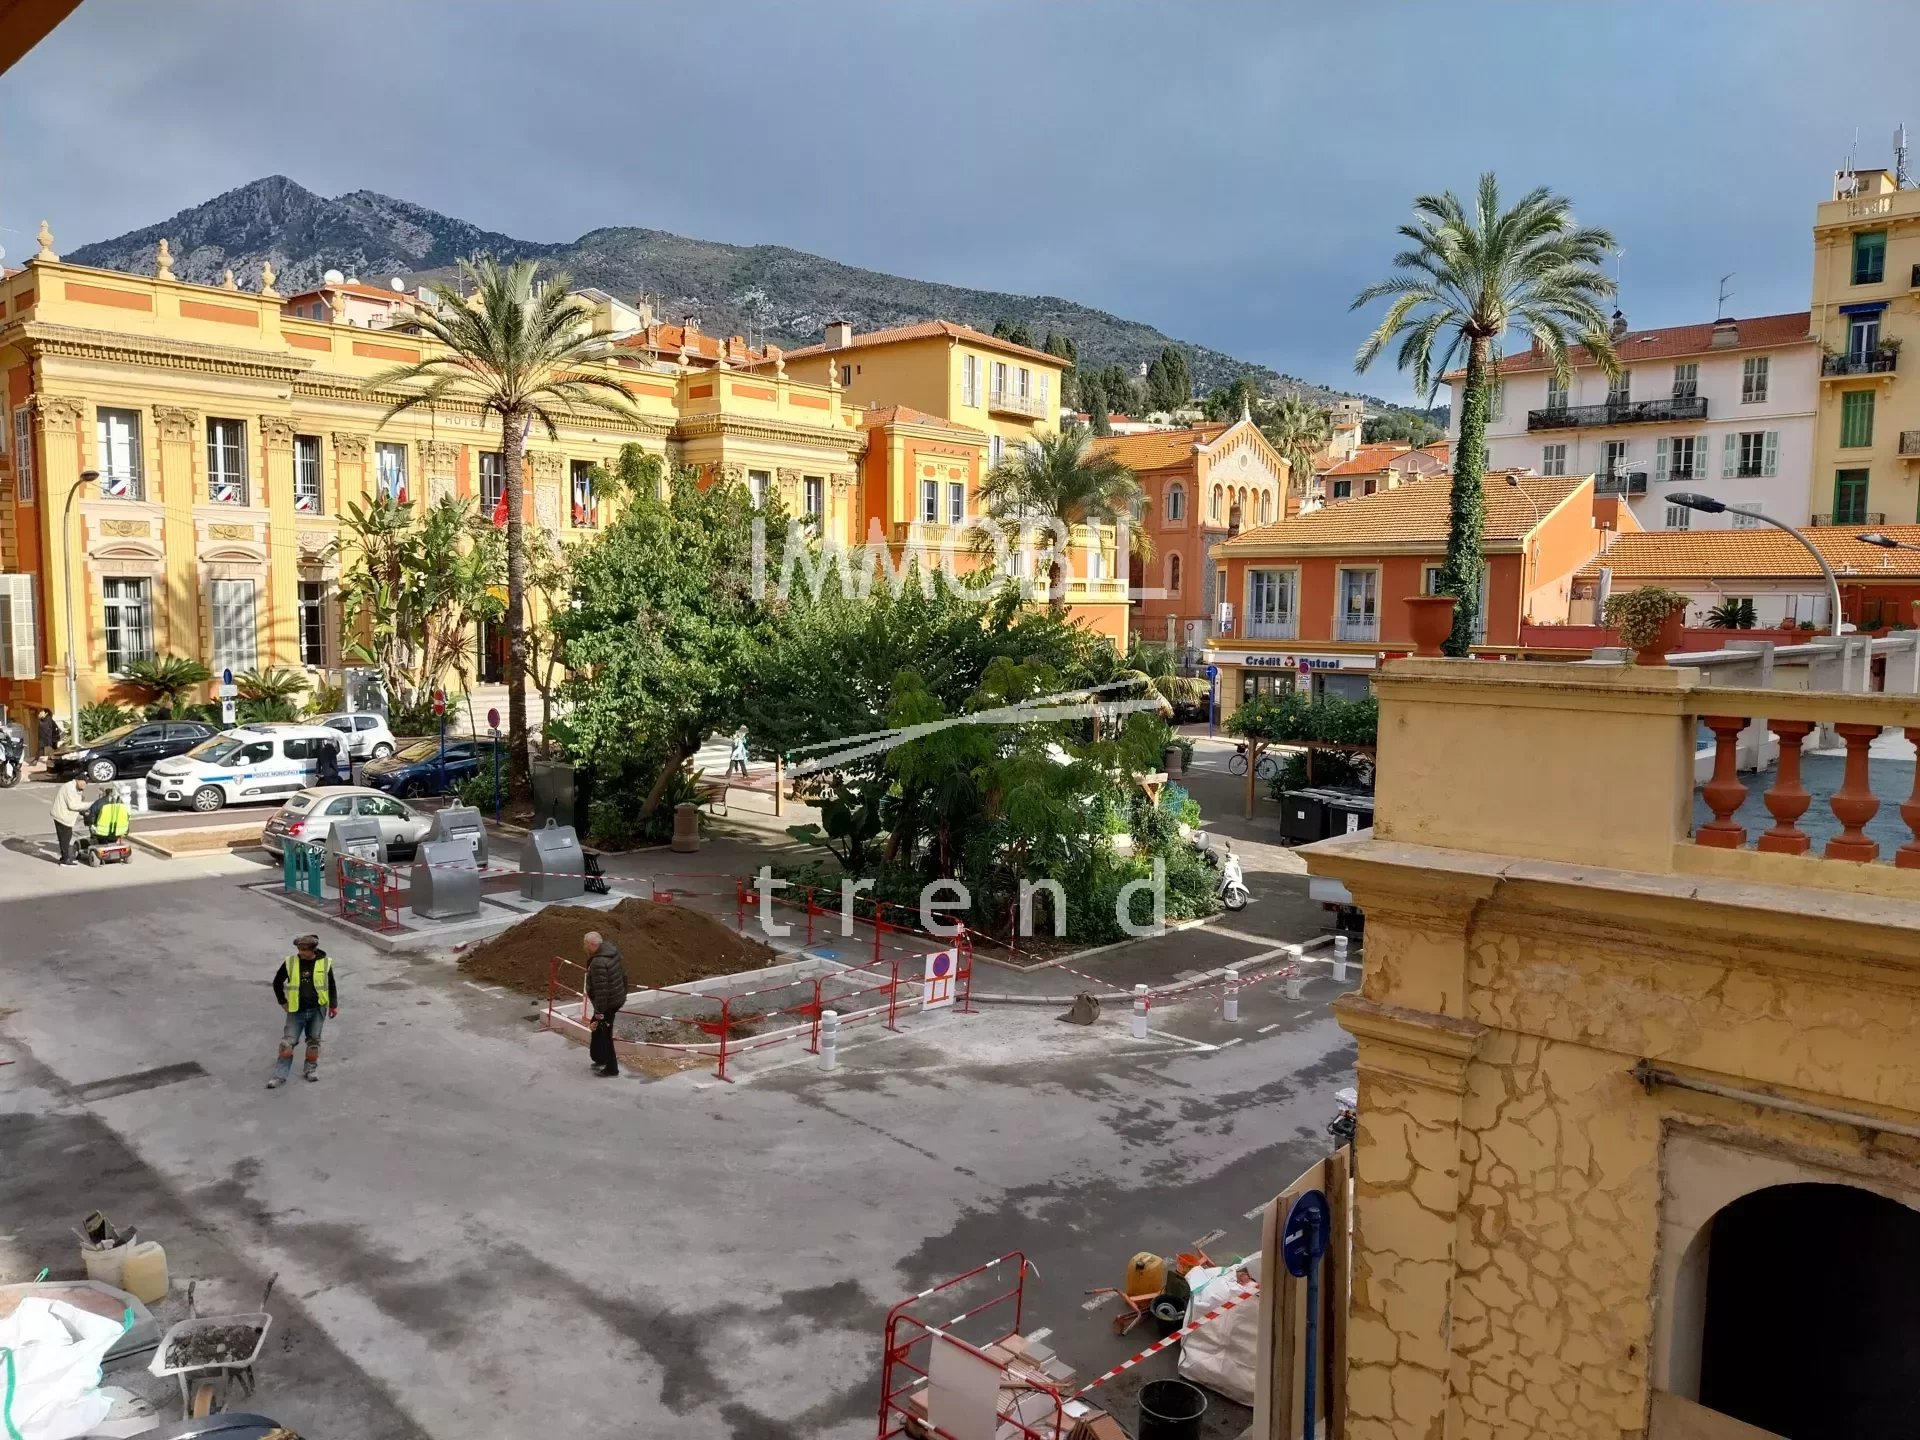 SOLE AGENT - MENTON TOWN CENTRE - Charming apartment in very good condition